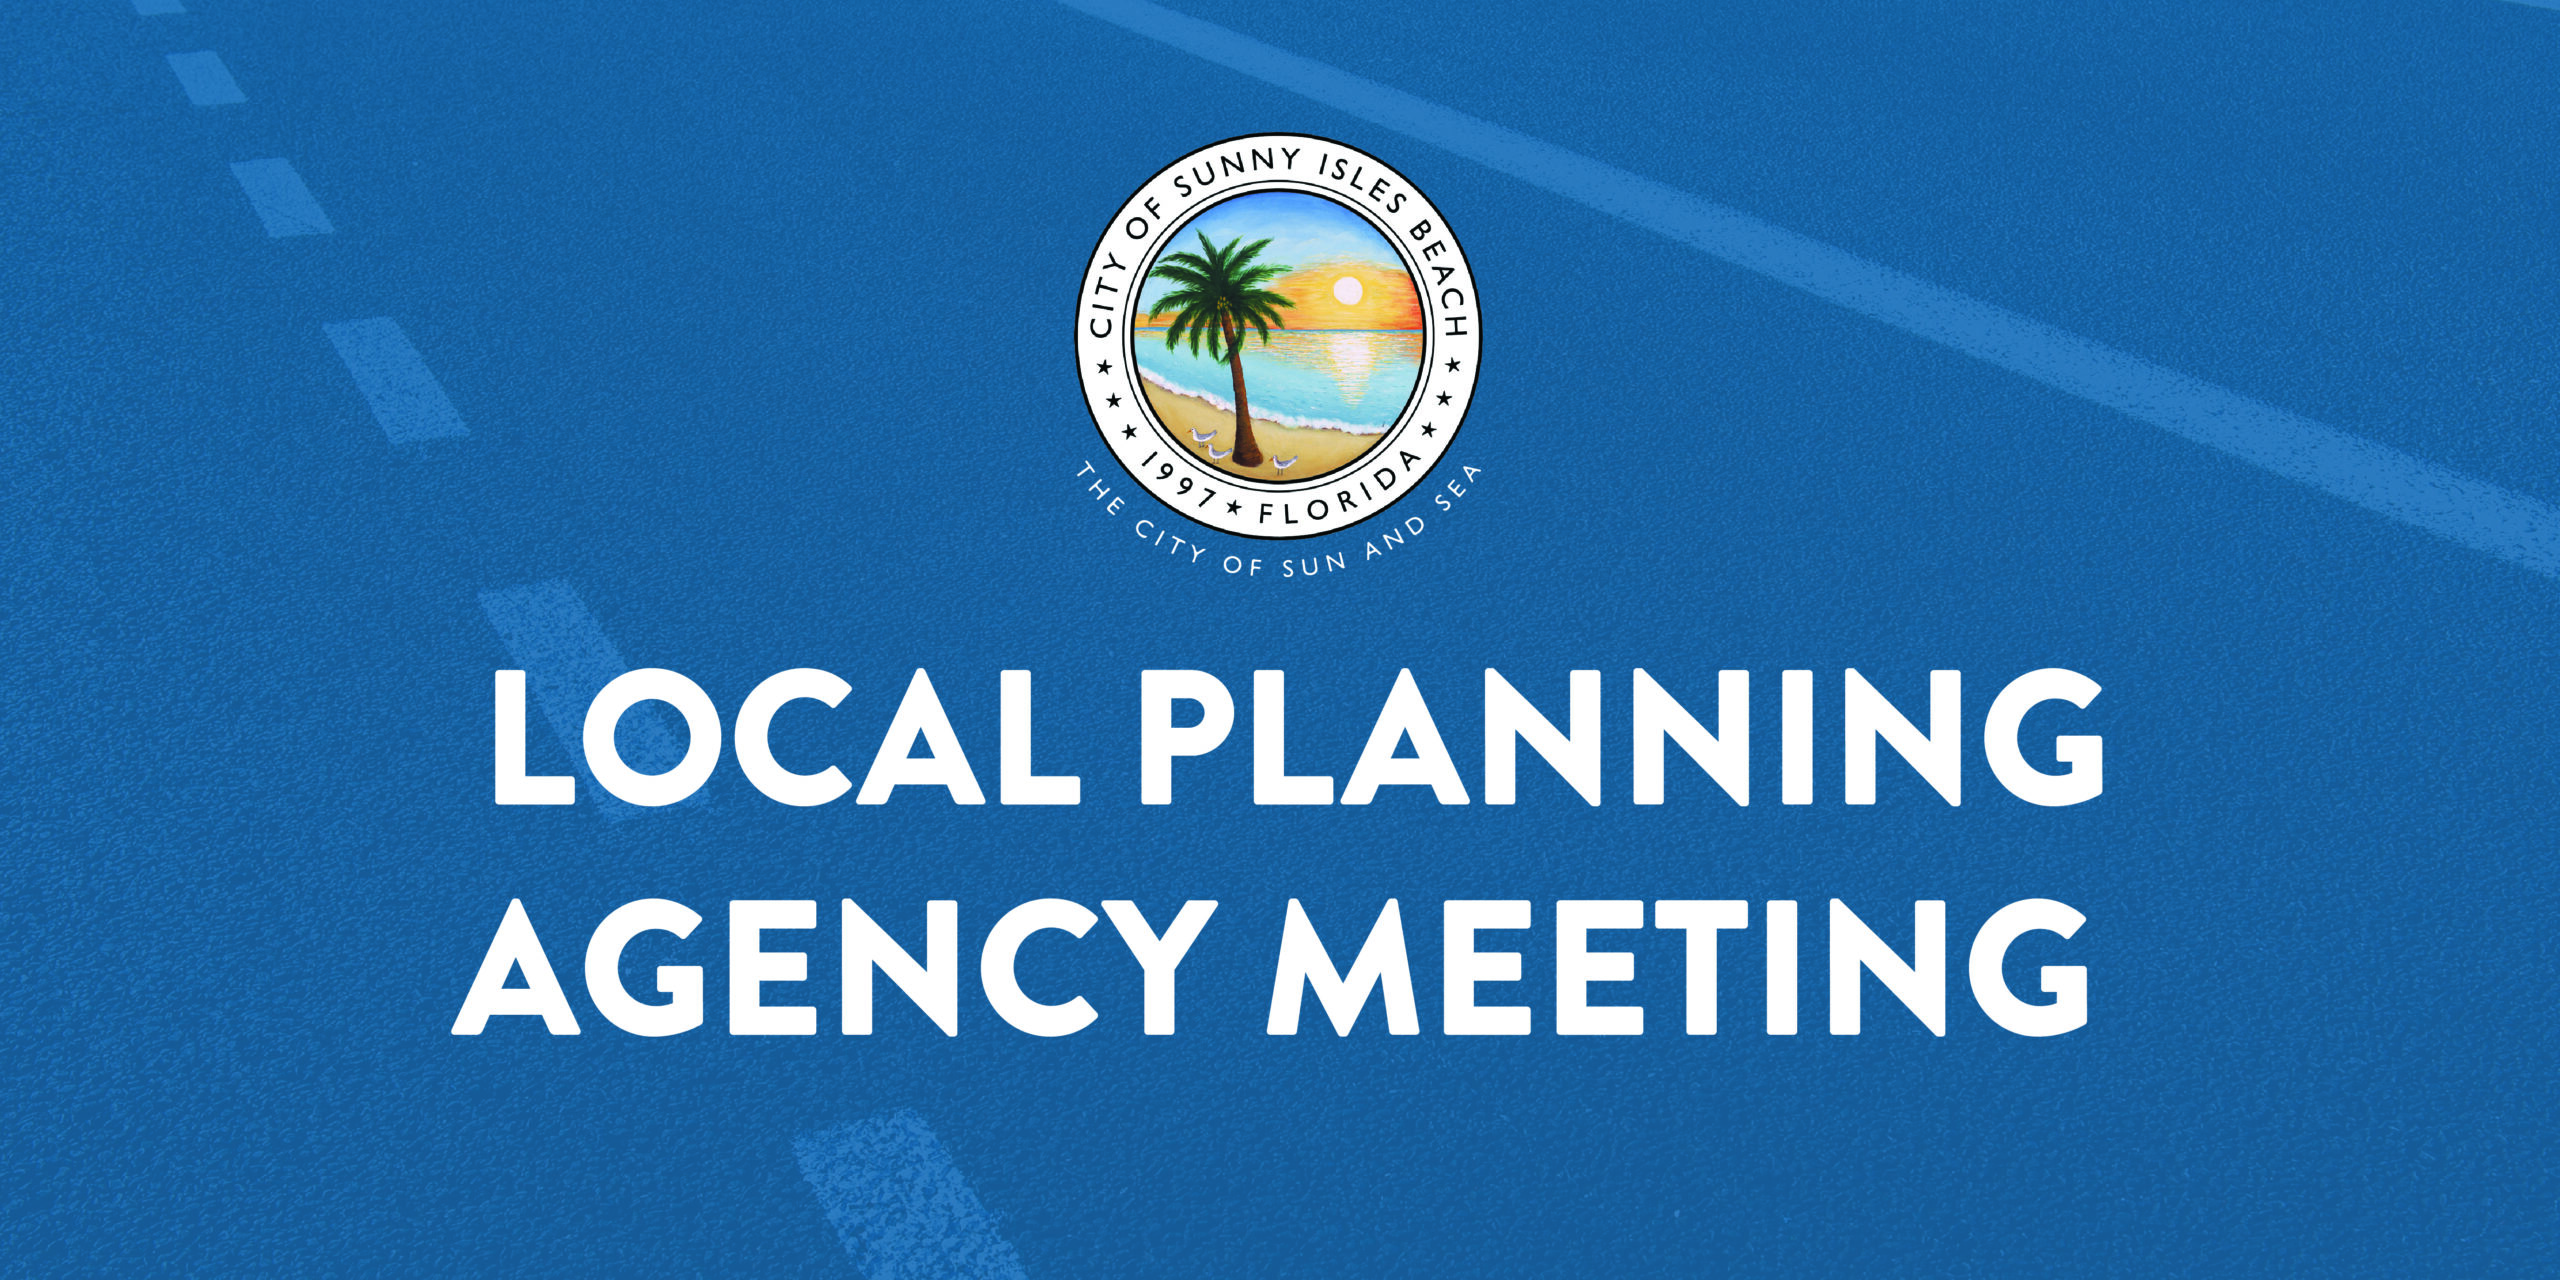 Local Planning Agency Meeting